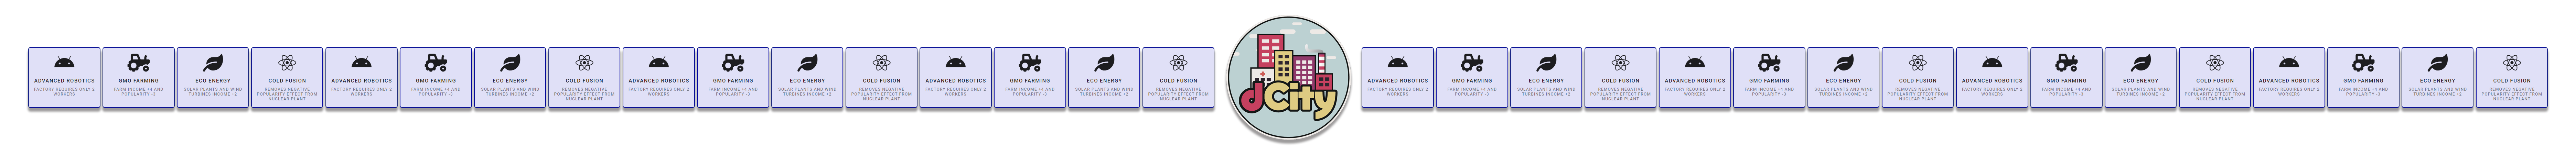 Dividers-for-Posts-About-dCity-2.png